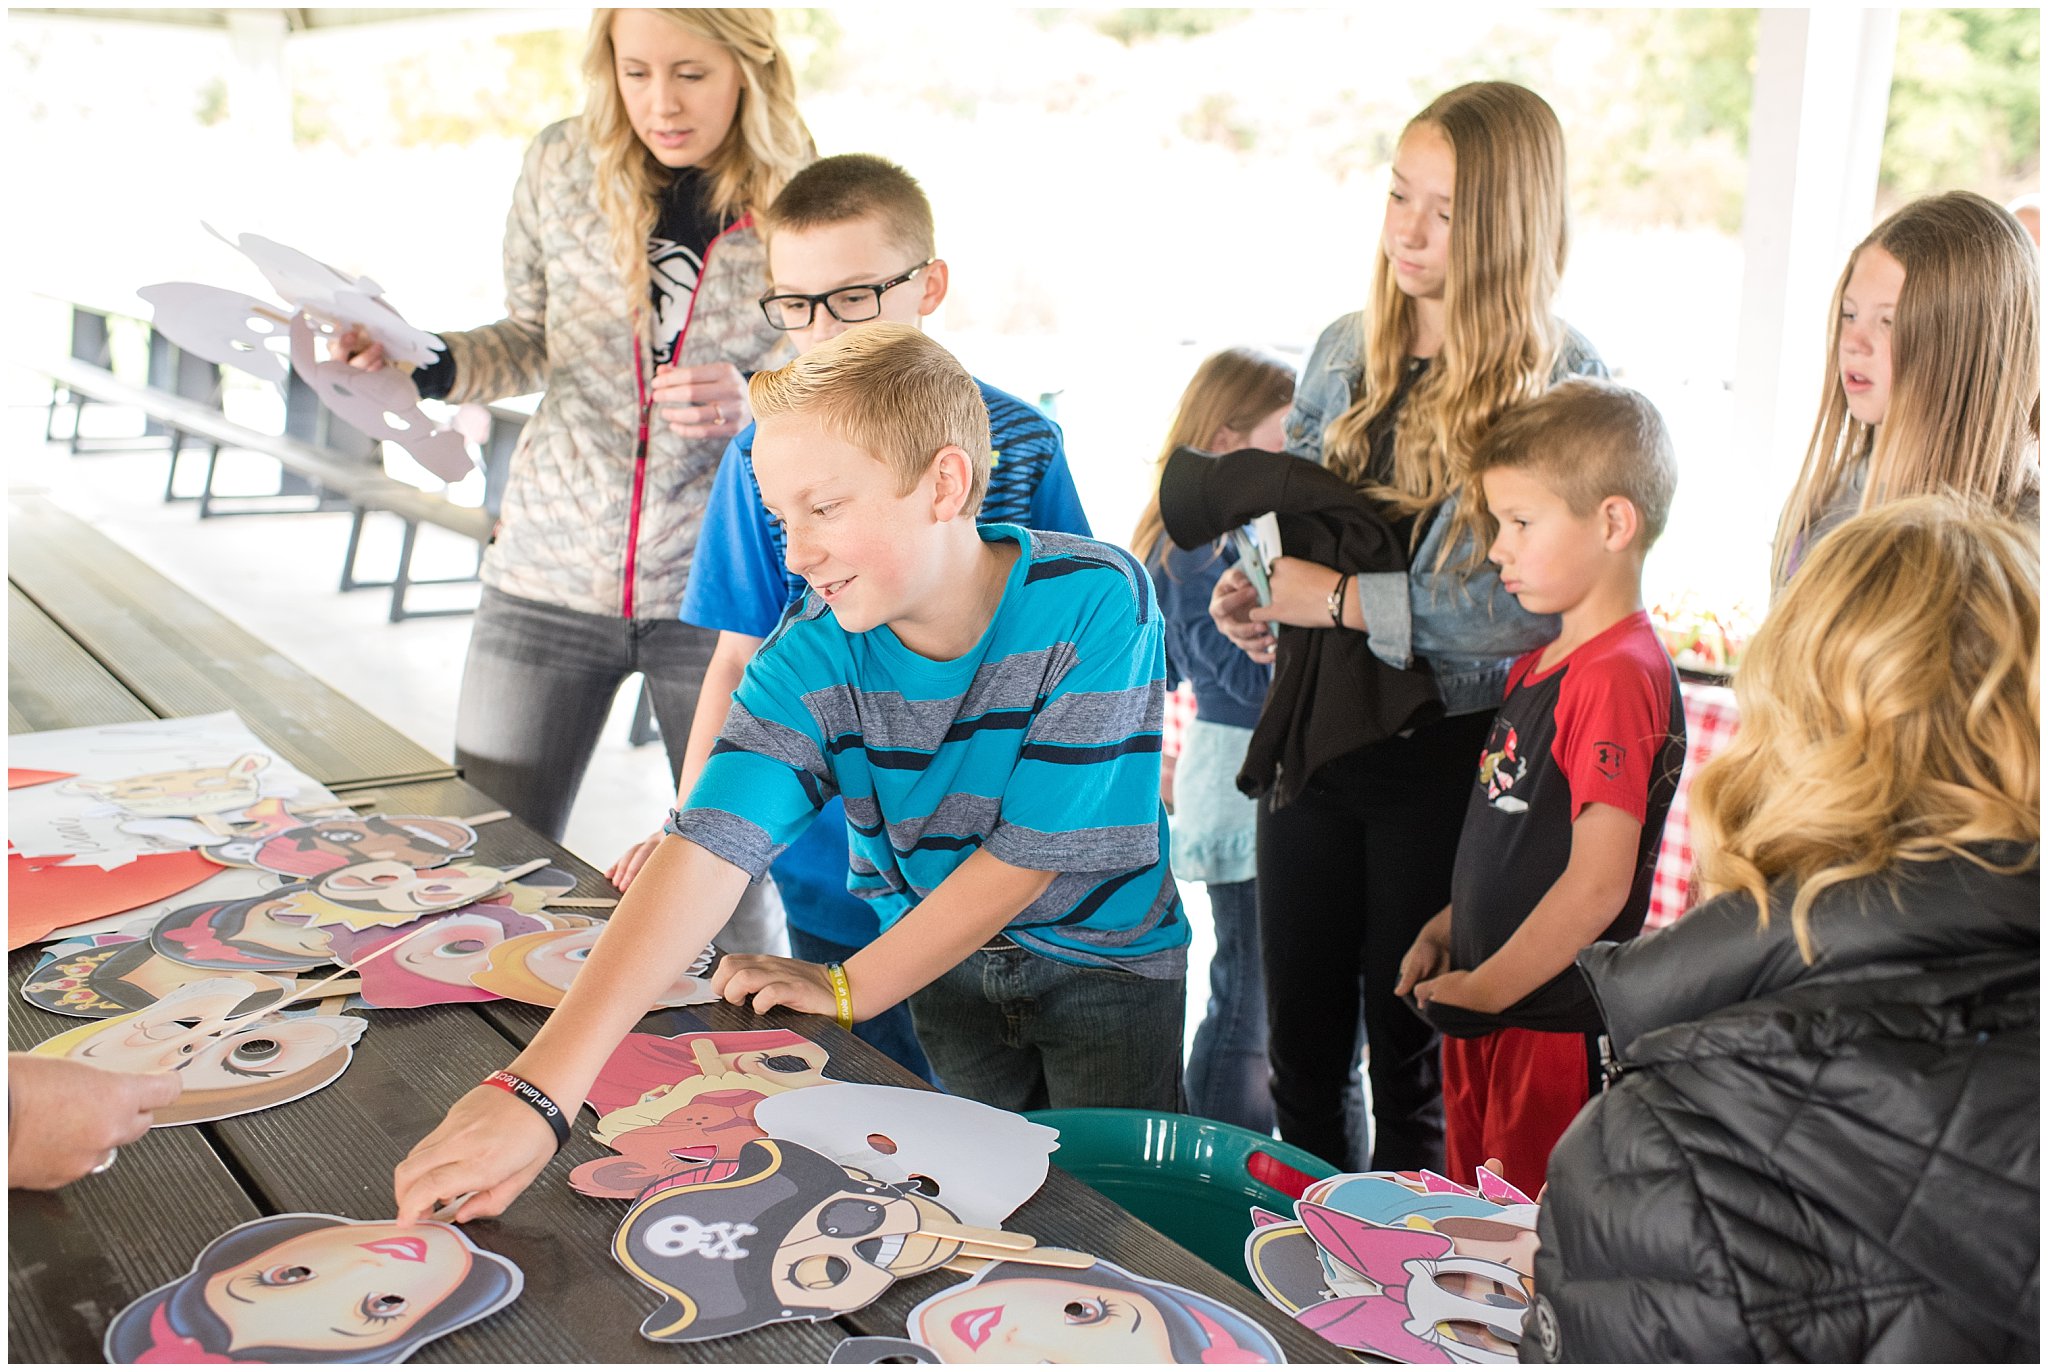 Picking out Disney character masks | Tremonton Family Pictures and Make a Wish Event | Jessie and Dallin Photography